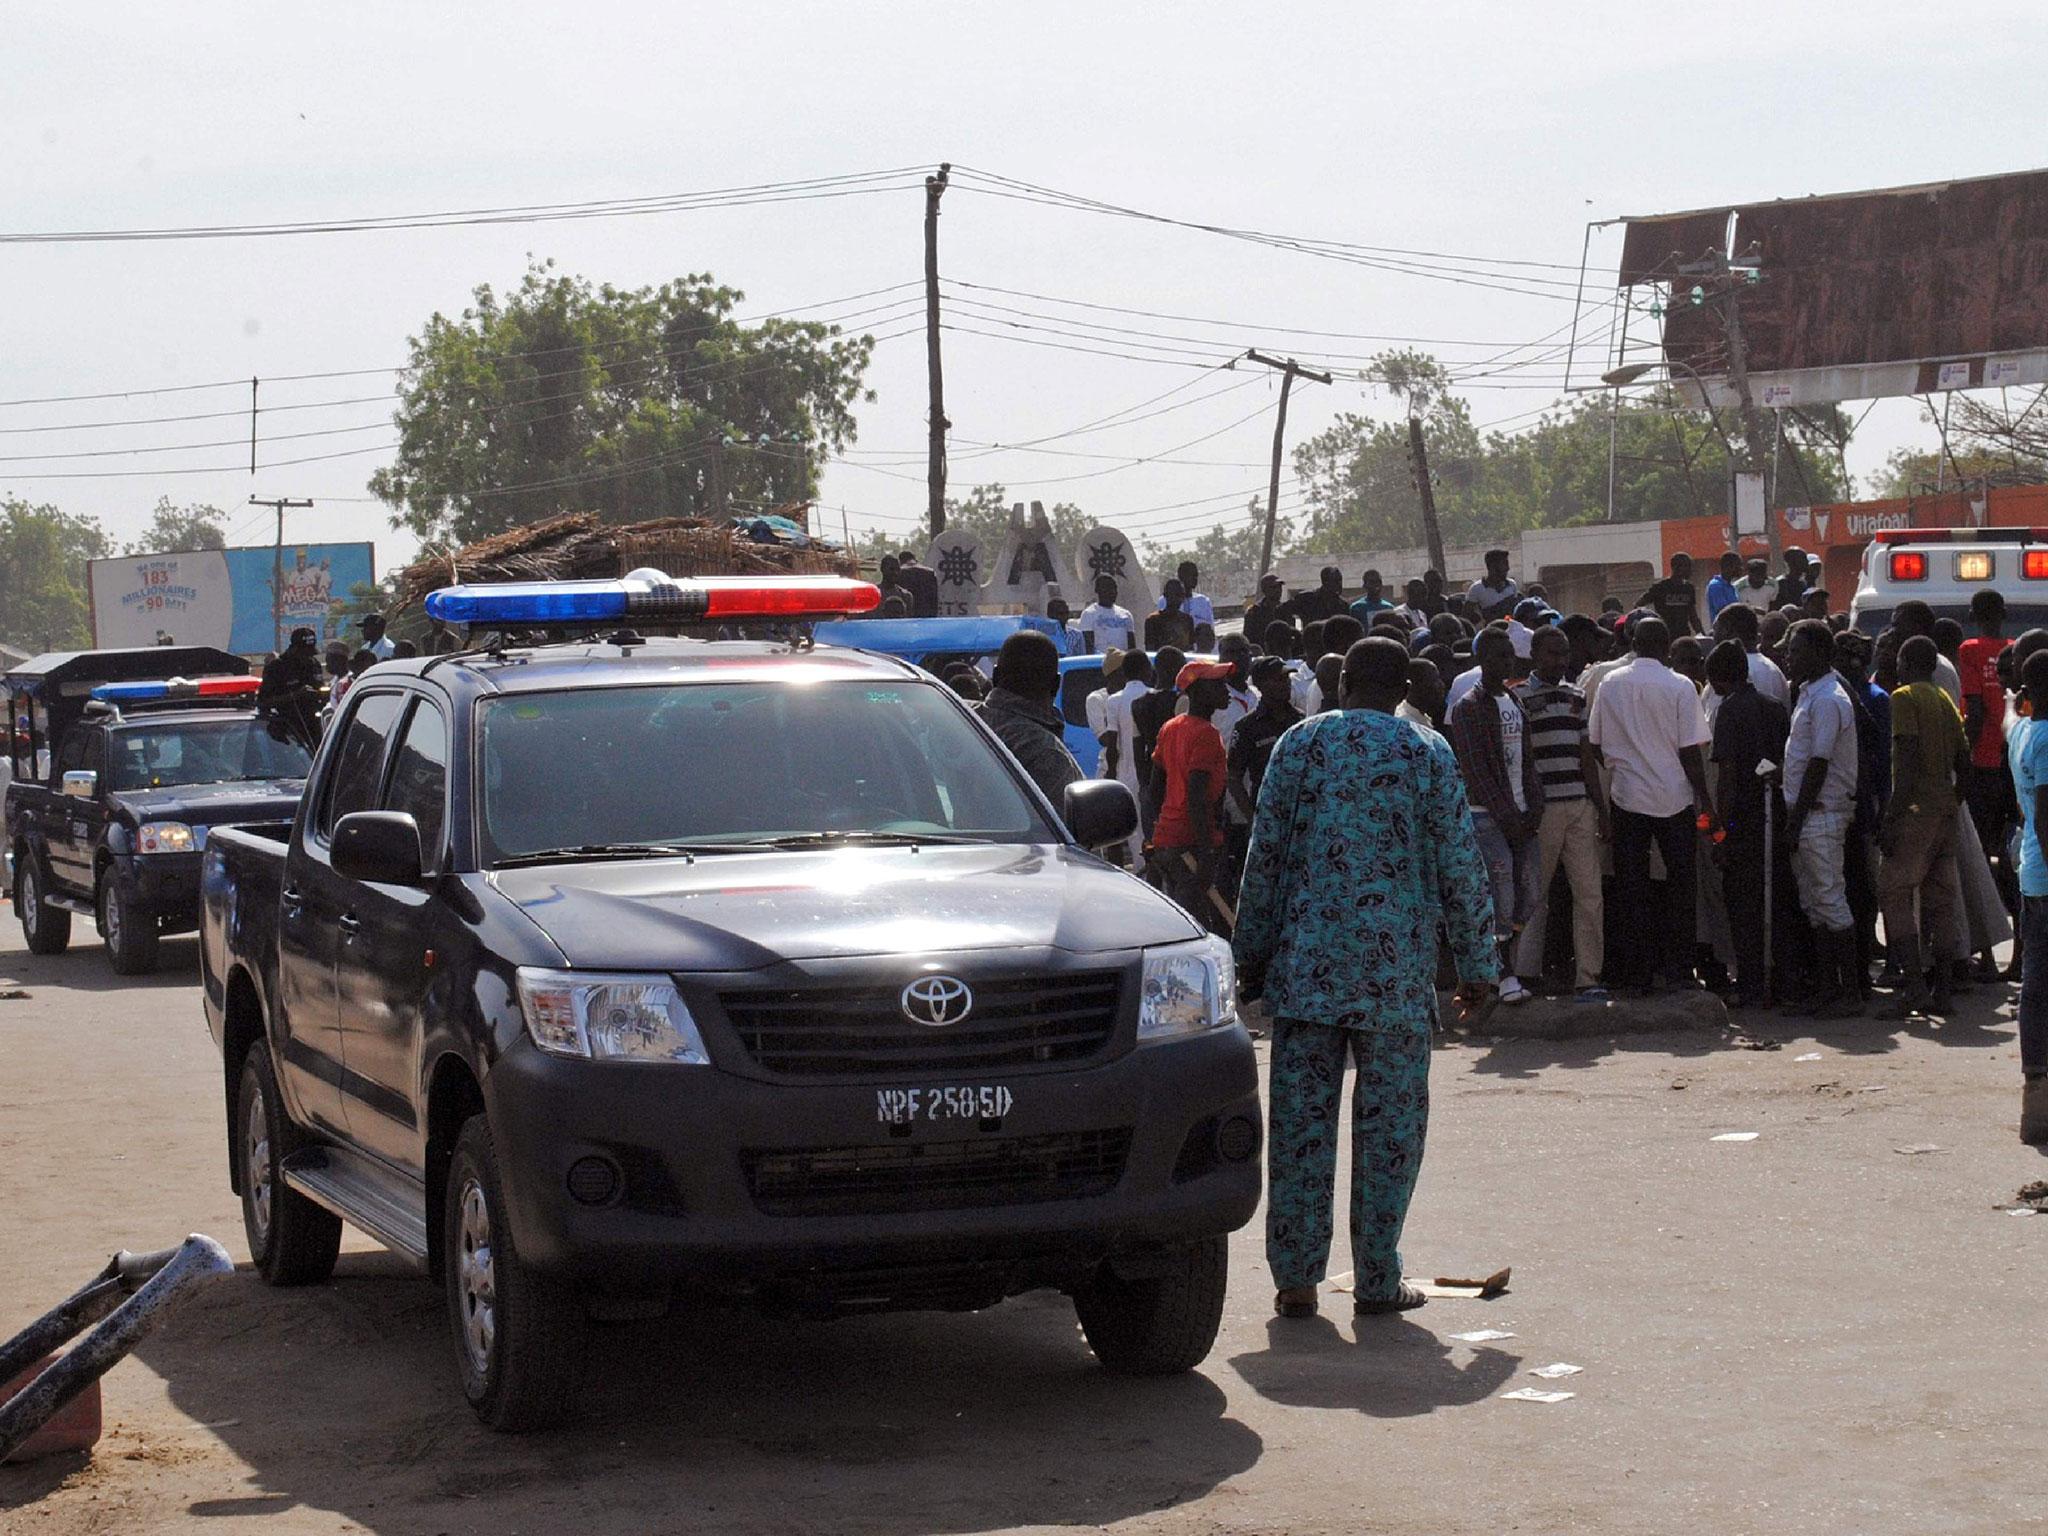 Emergency services, police and residents gather at the scene of a double suicide bomb attack on a market in Maiduguri, 11 December, 2016